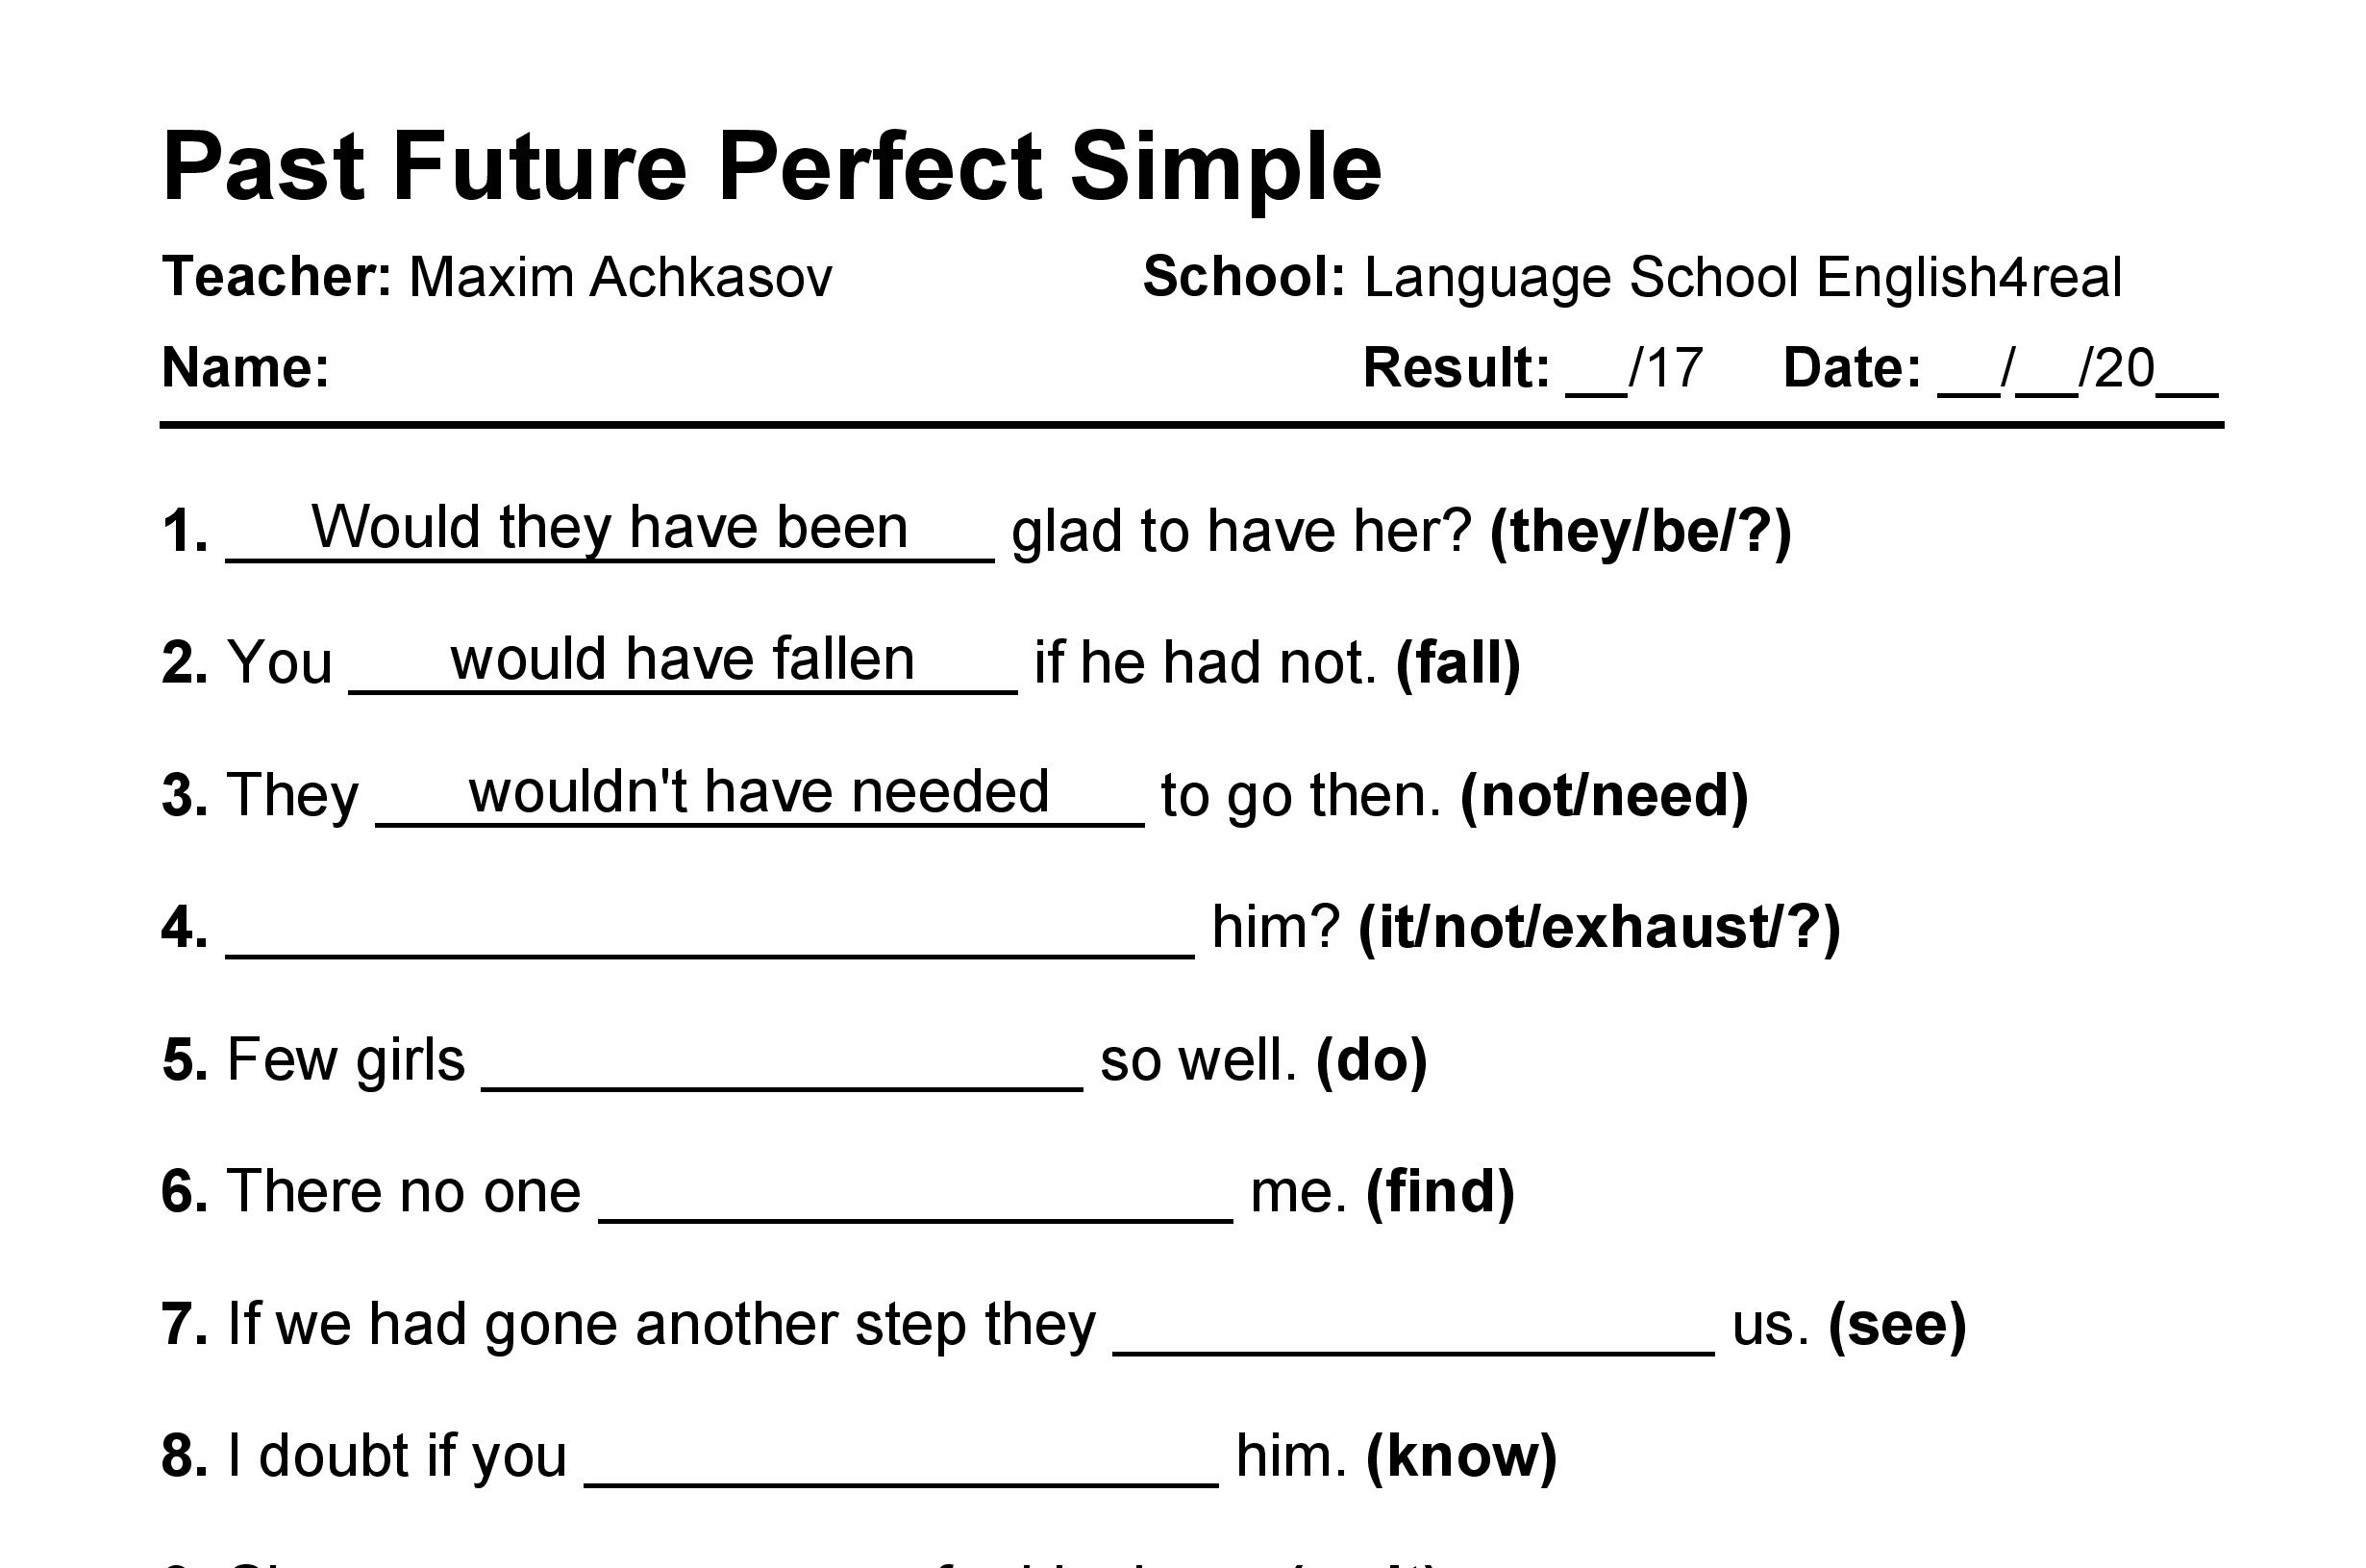 English grammar fill in the blanks exercises with answers in PDF - Past Future Perfect